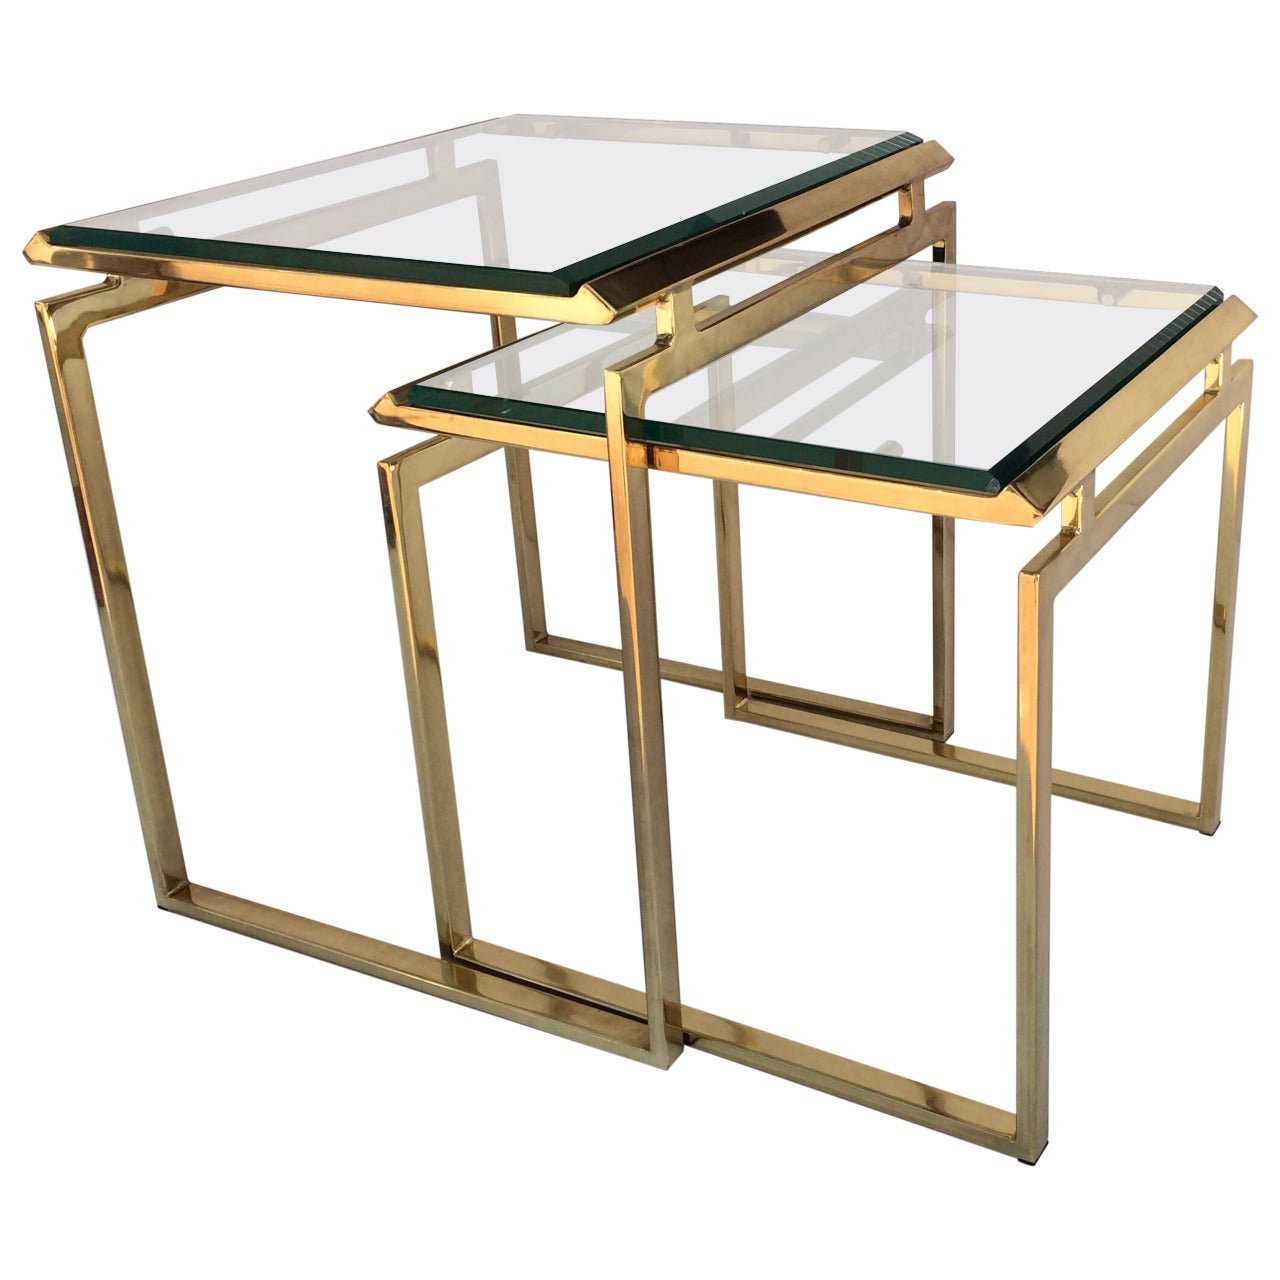 Polished Brass and Beveled Glass Nesting Tables Designed by Milo Baughman